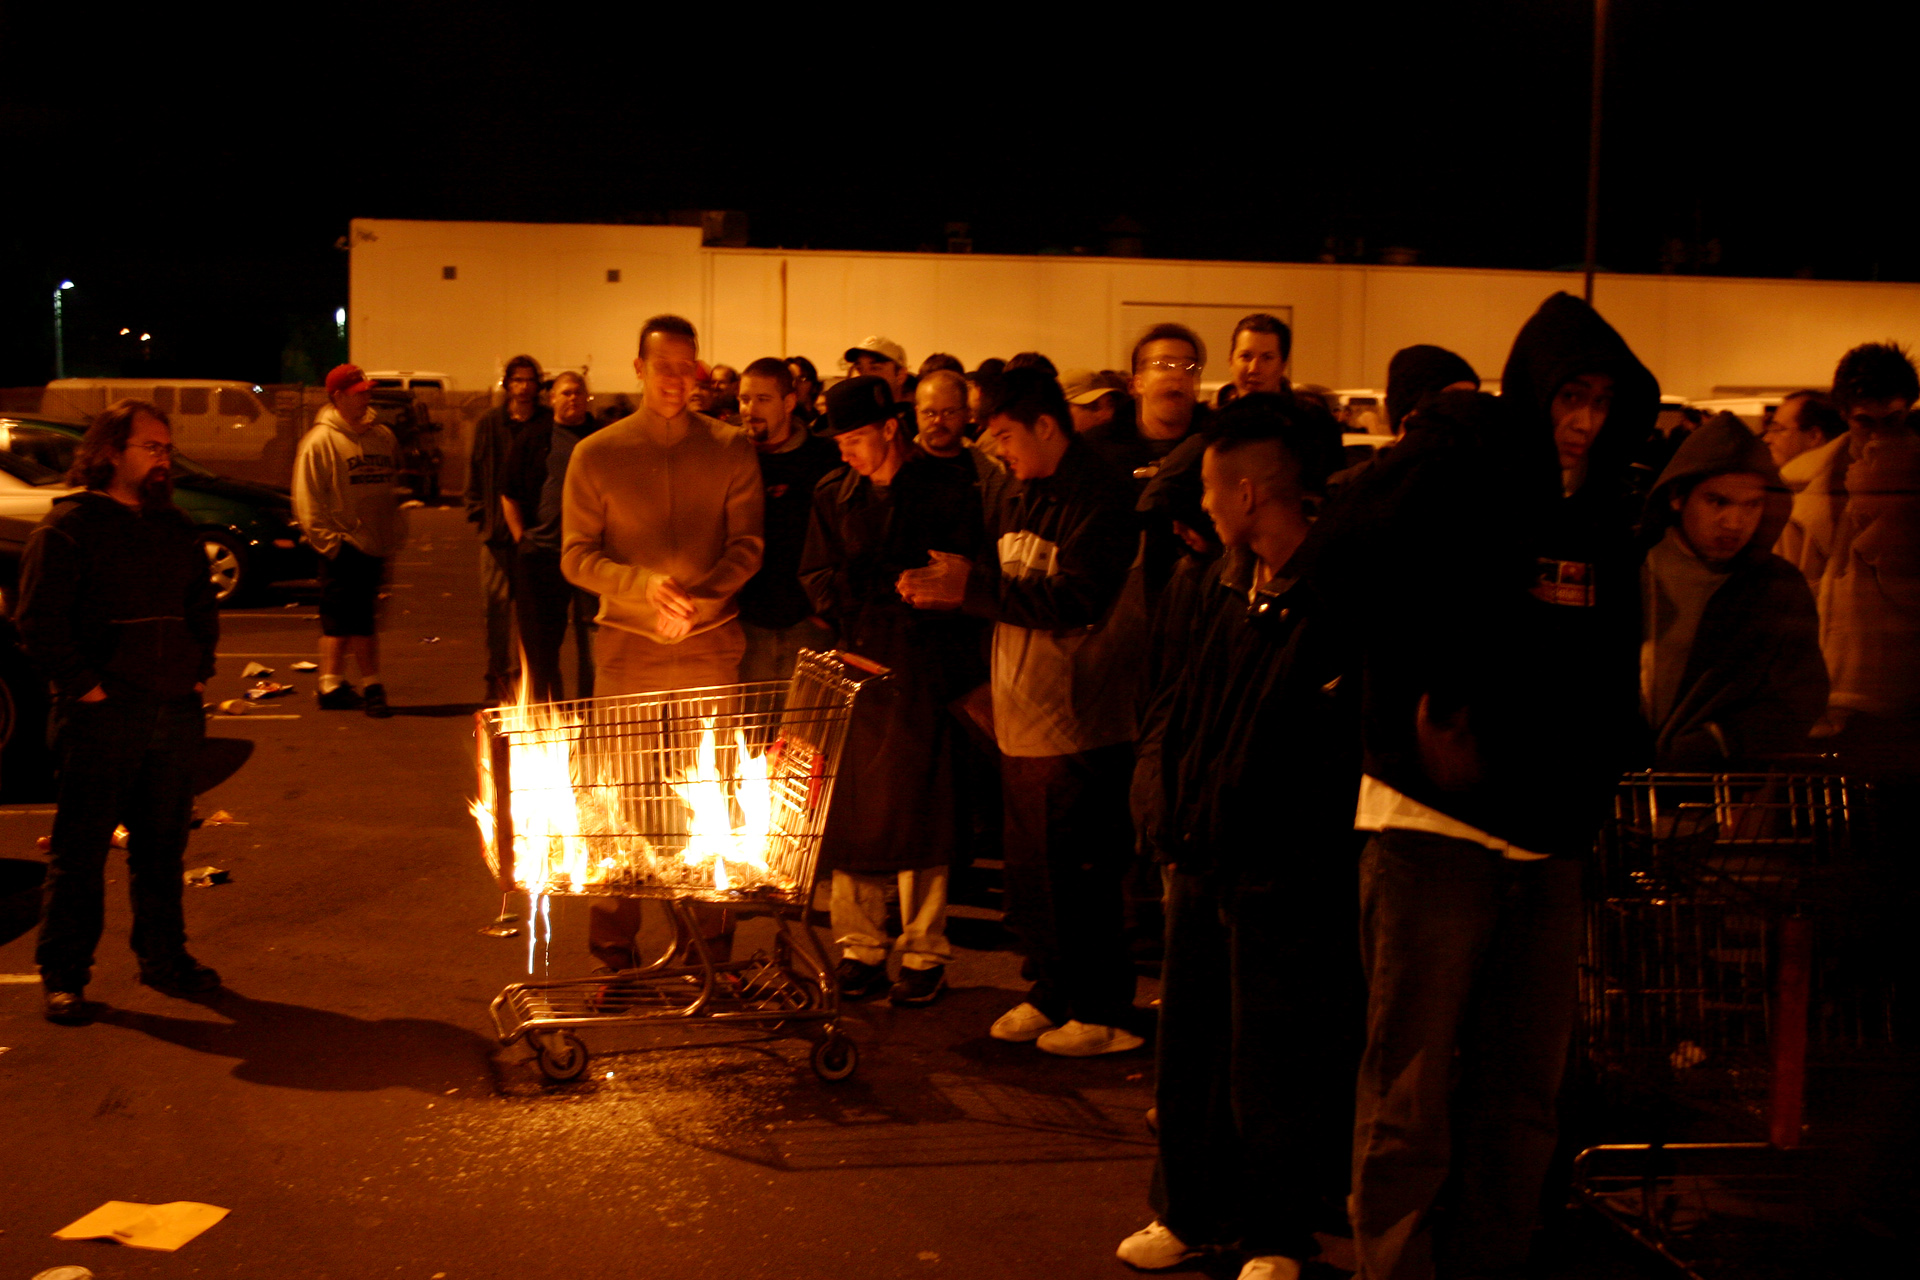 Nerds were starting fires just to keep warm. That's how long they had been waiting in the cold.